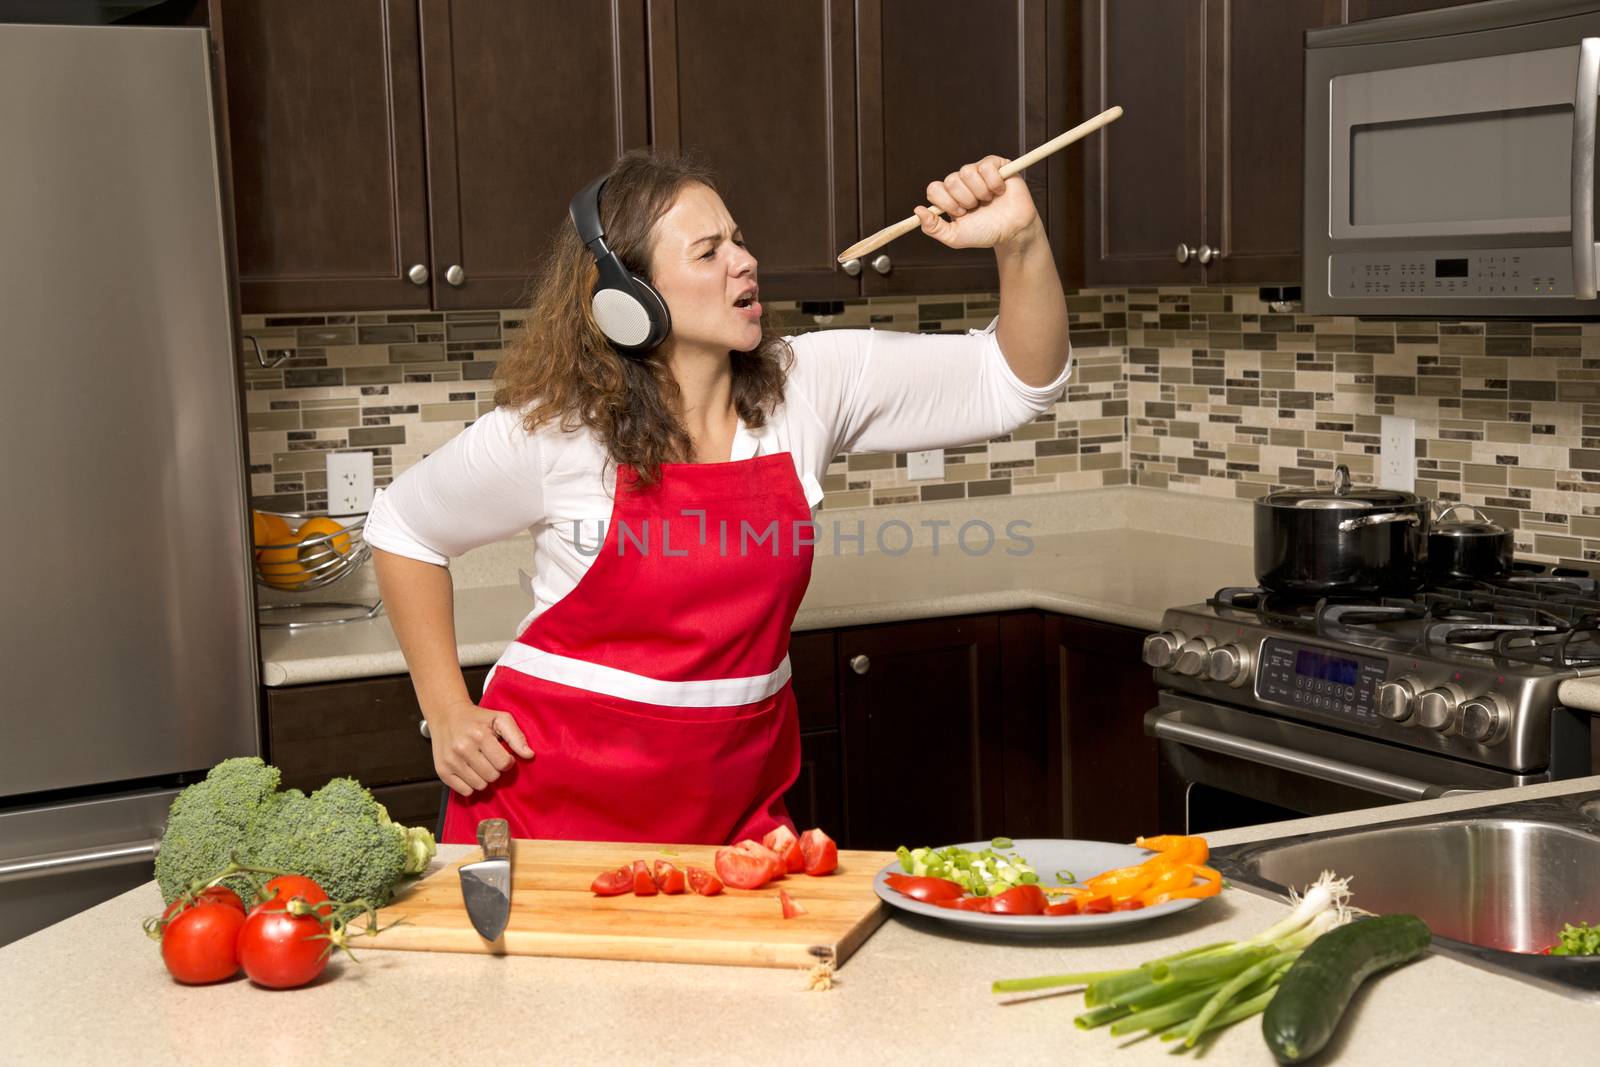 woman in the kitchen listening to music and singing